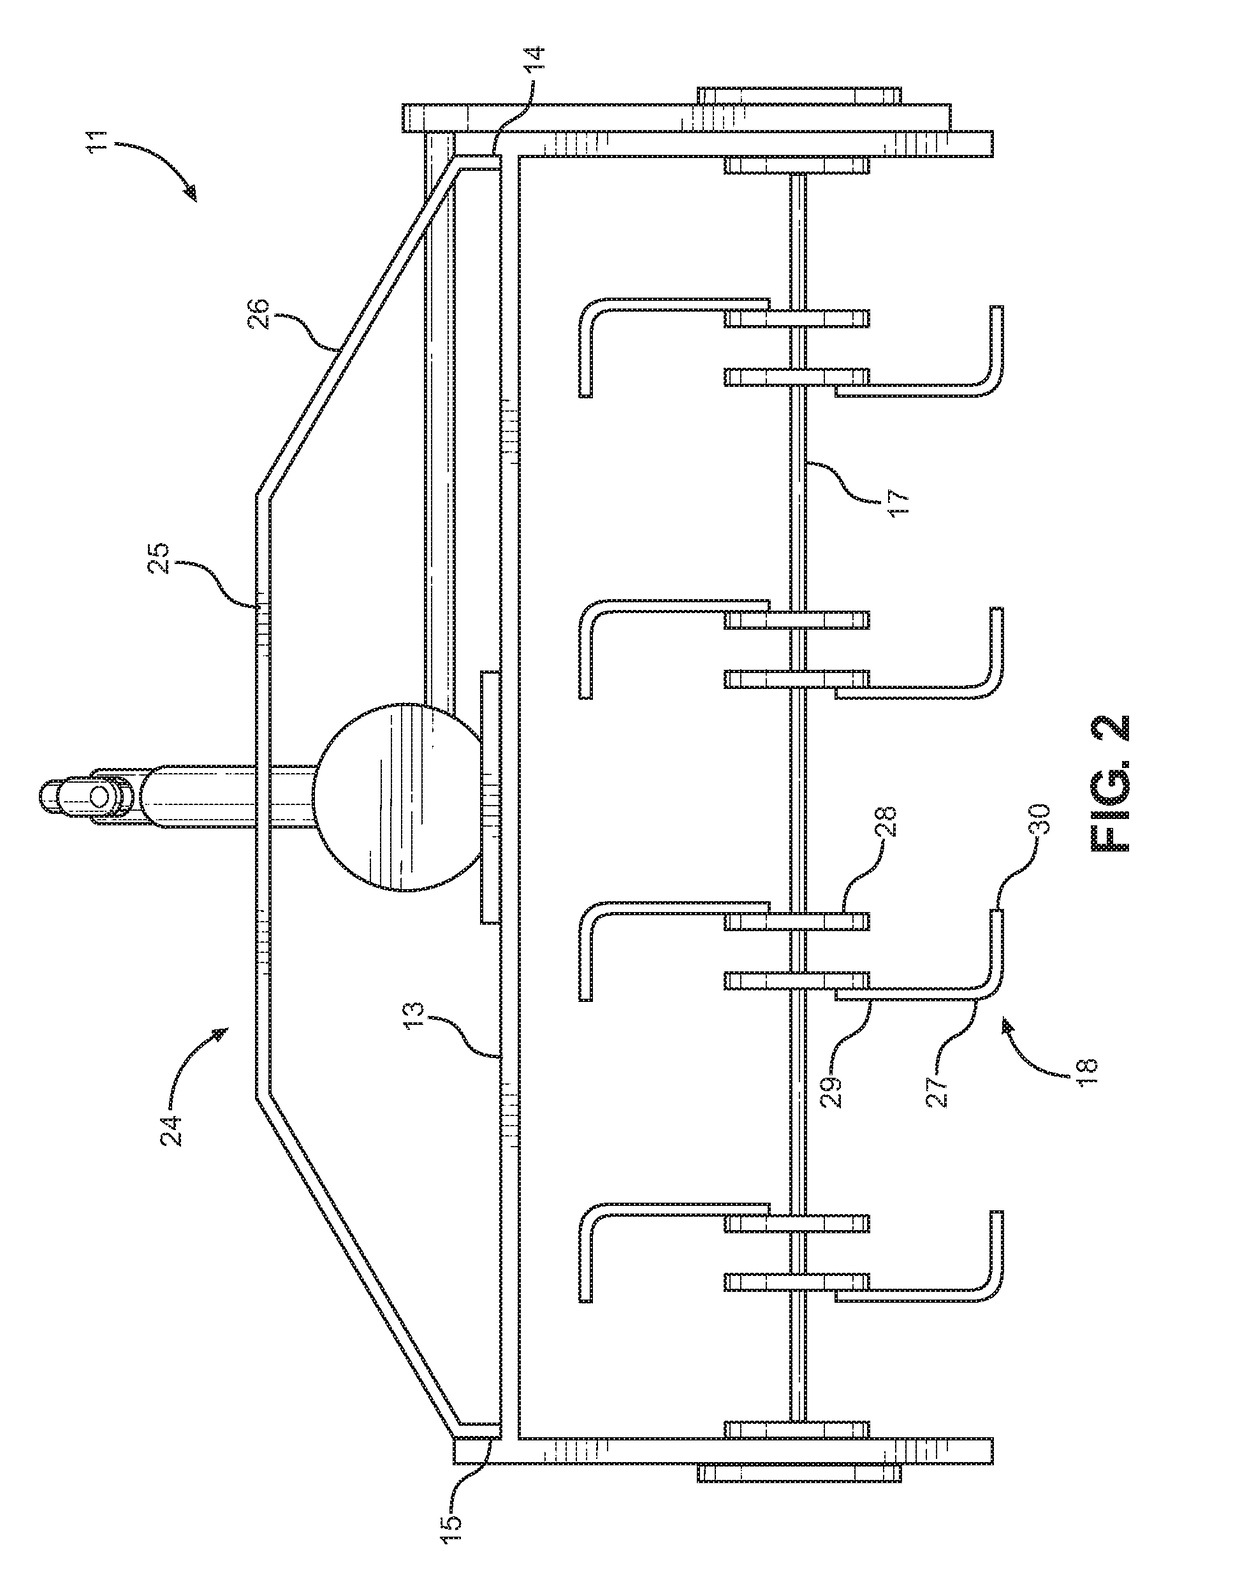 Attachable tilling device